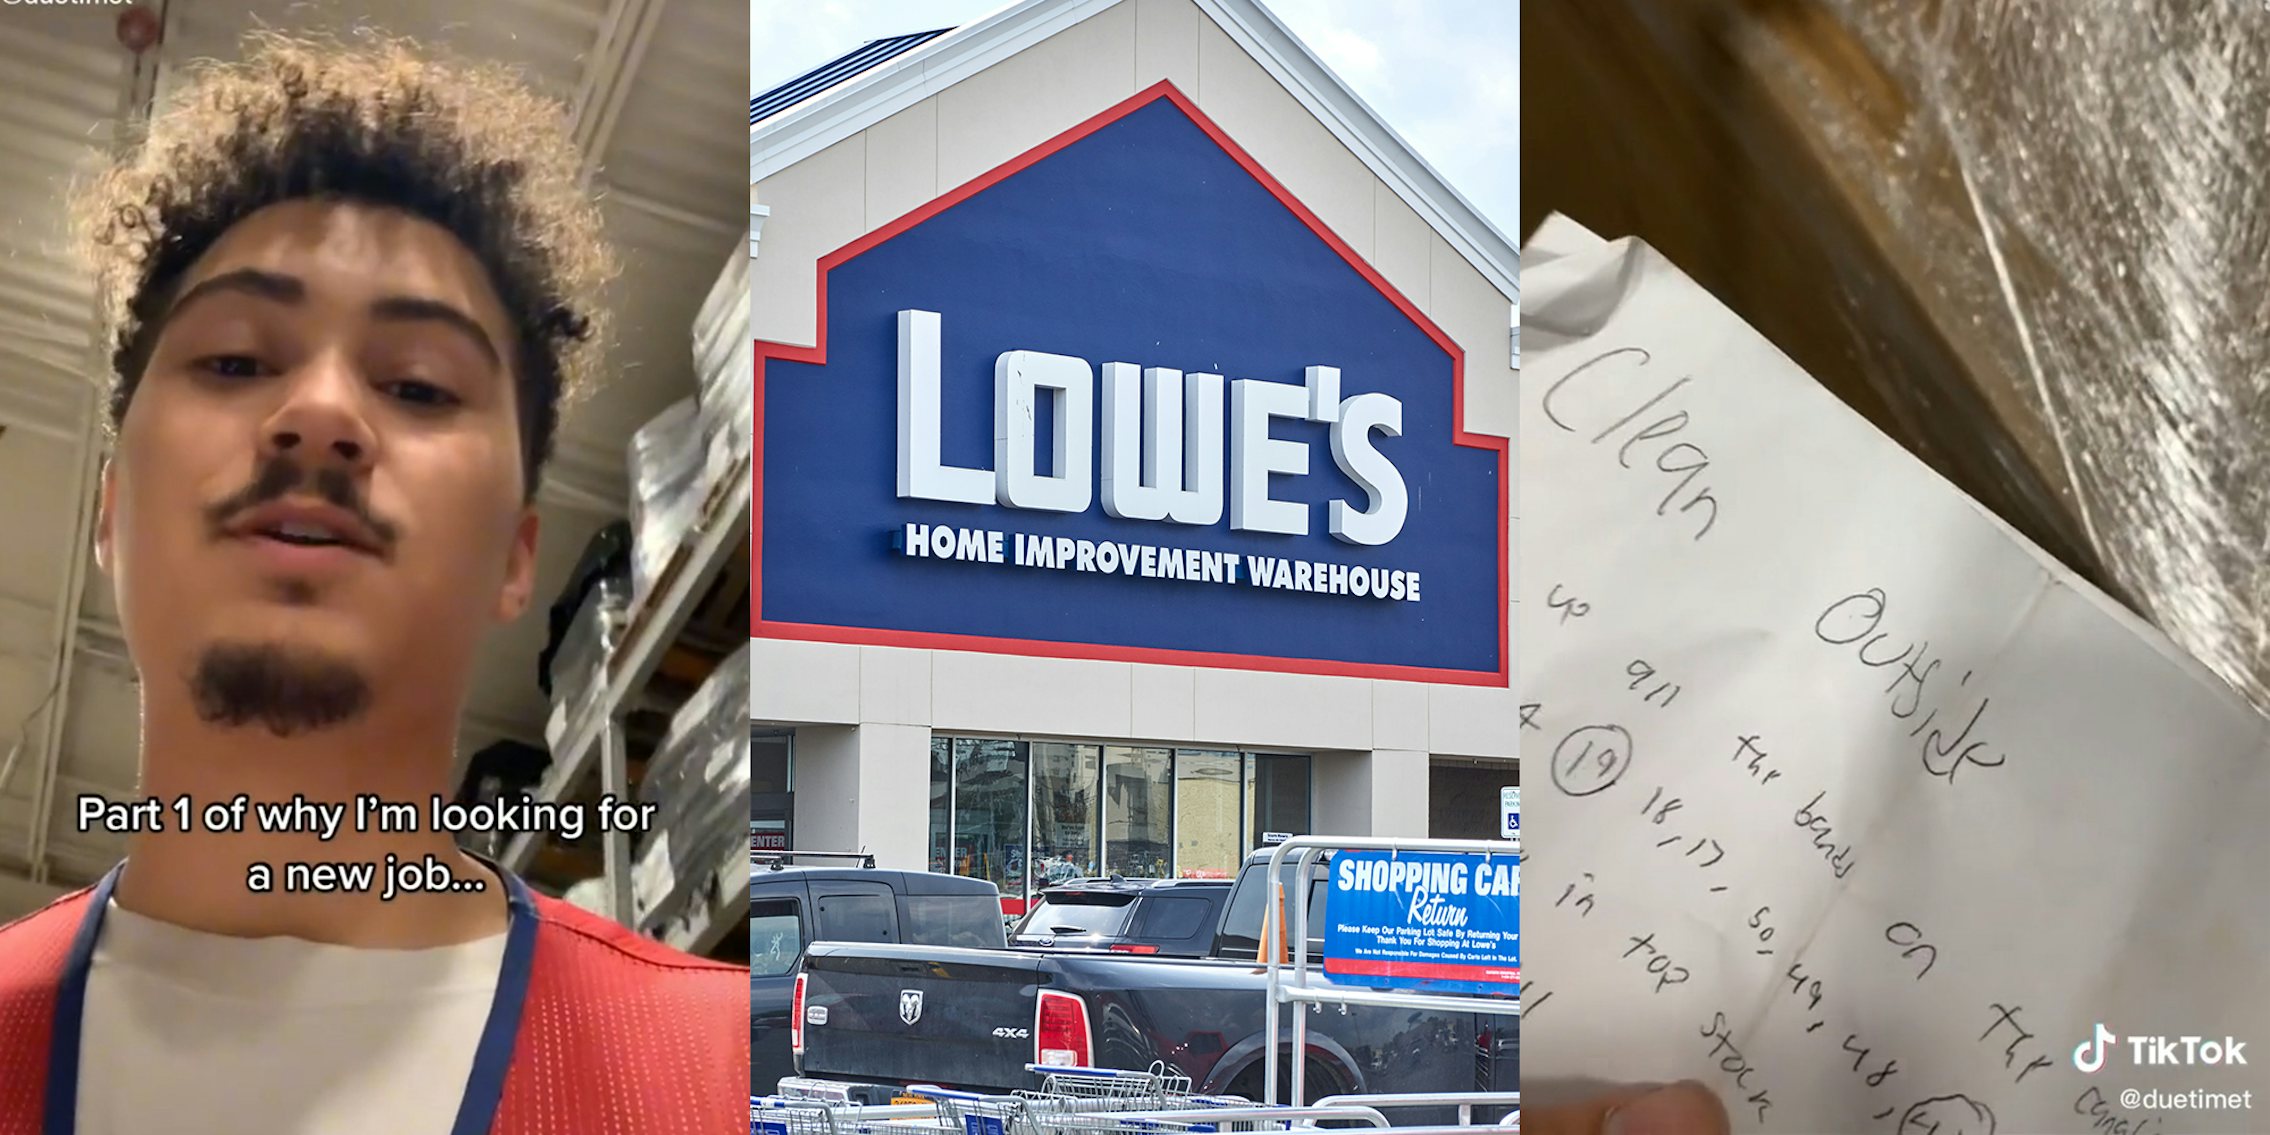 man in Lowe's with caption 'Part 1 of why I'm looking for a new job..' (l) Lowe's storefront (c) note with 'Clean outside' hand-written (r)